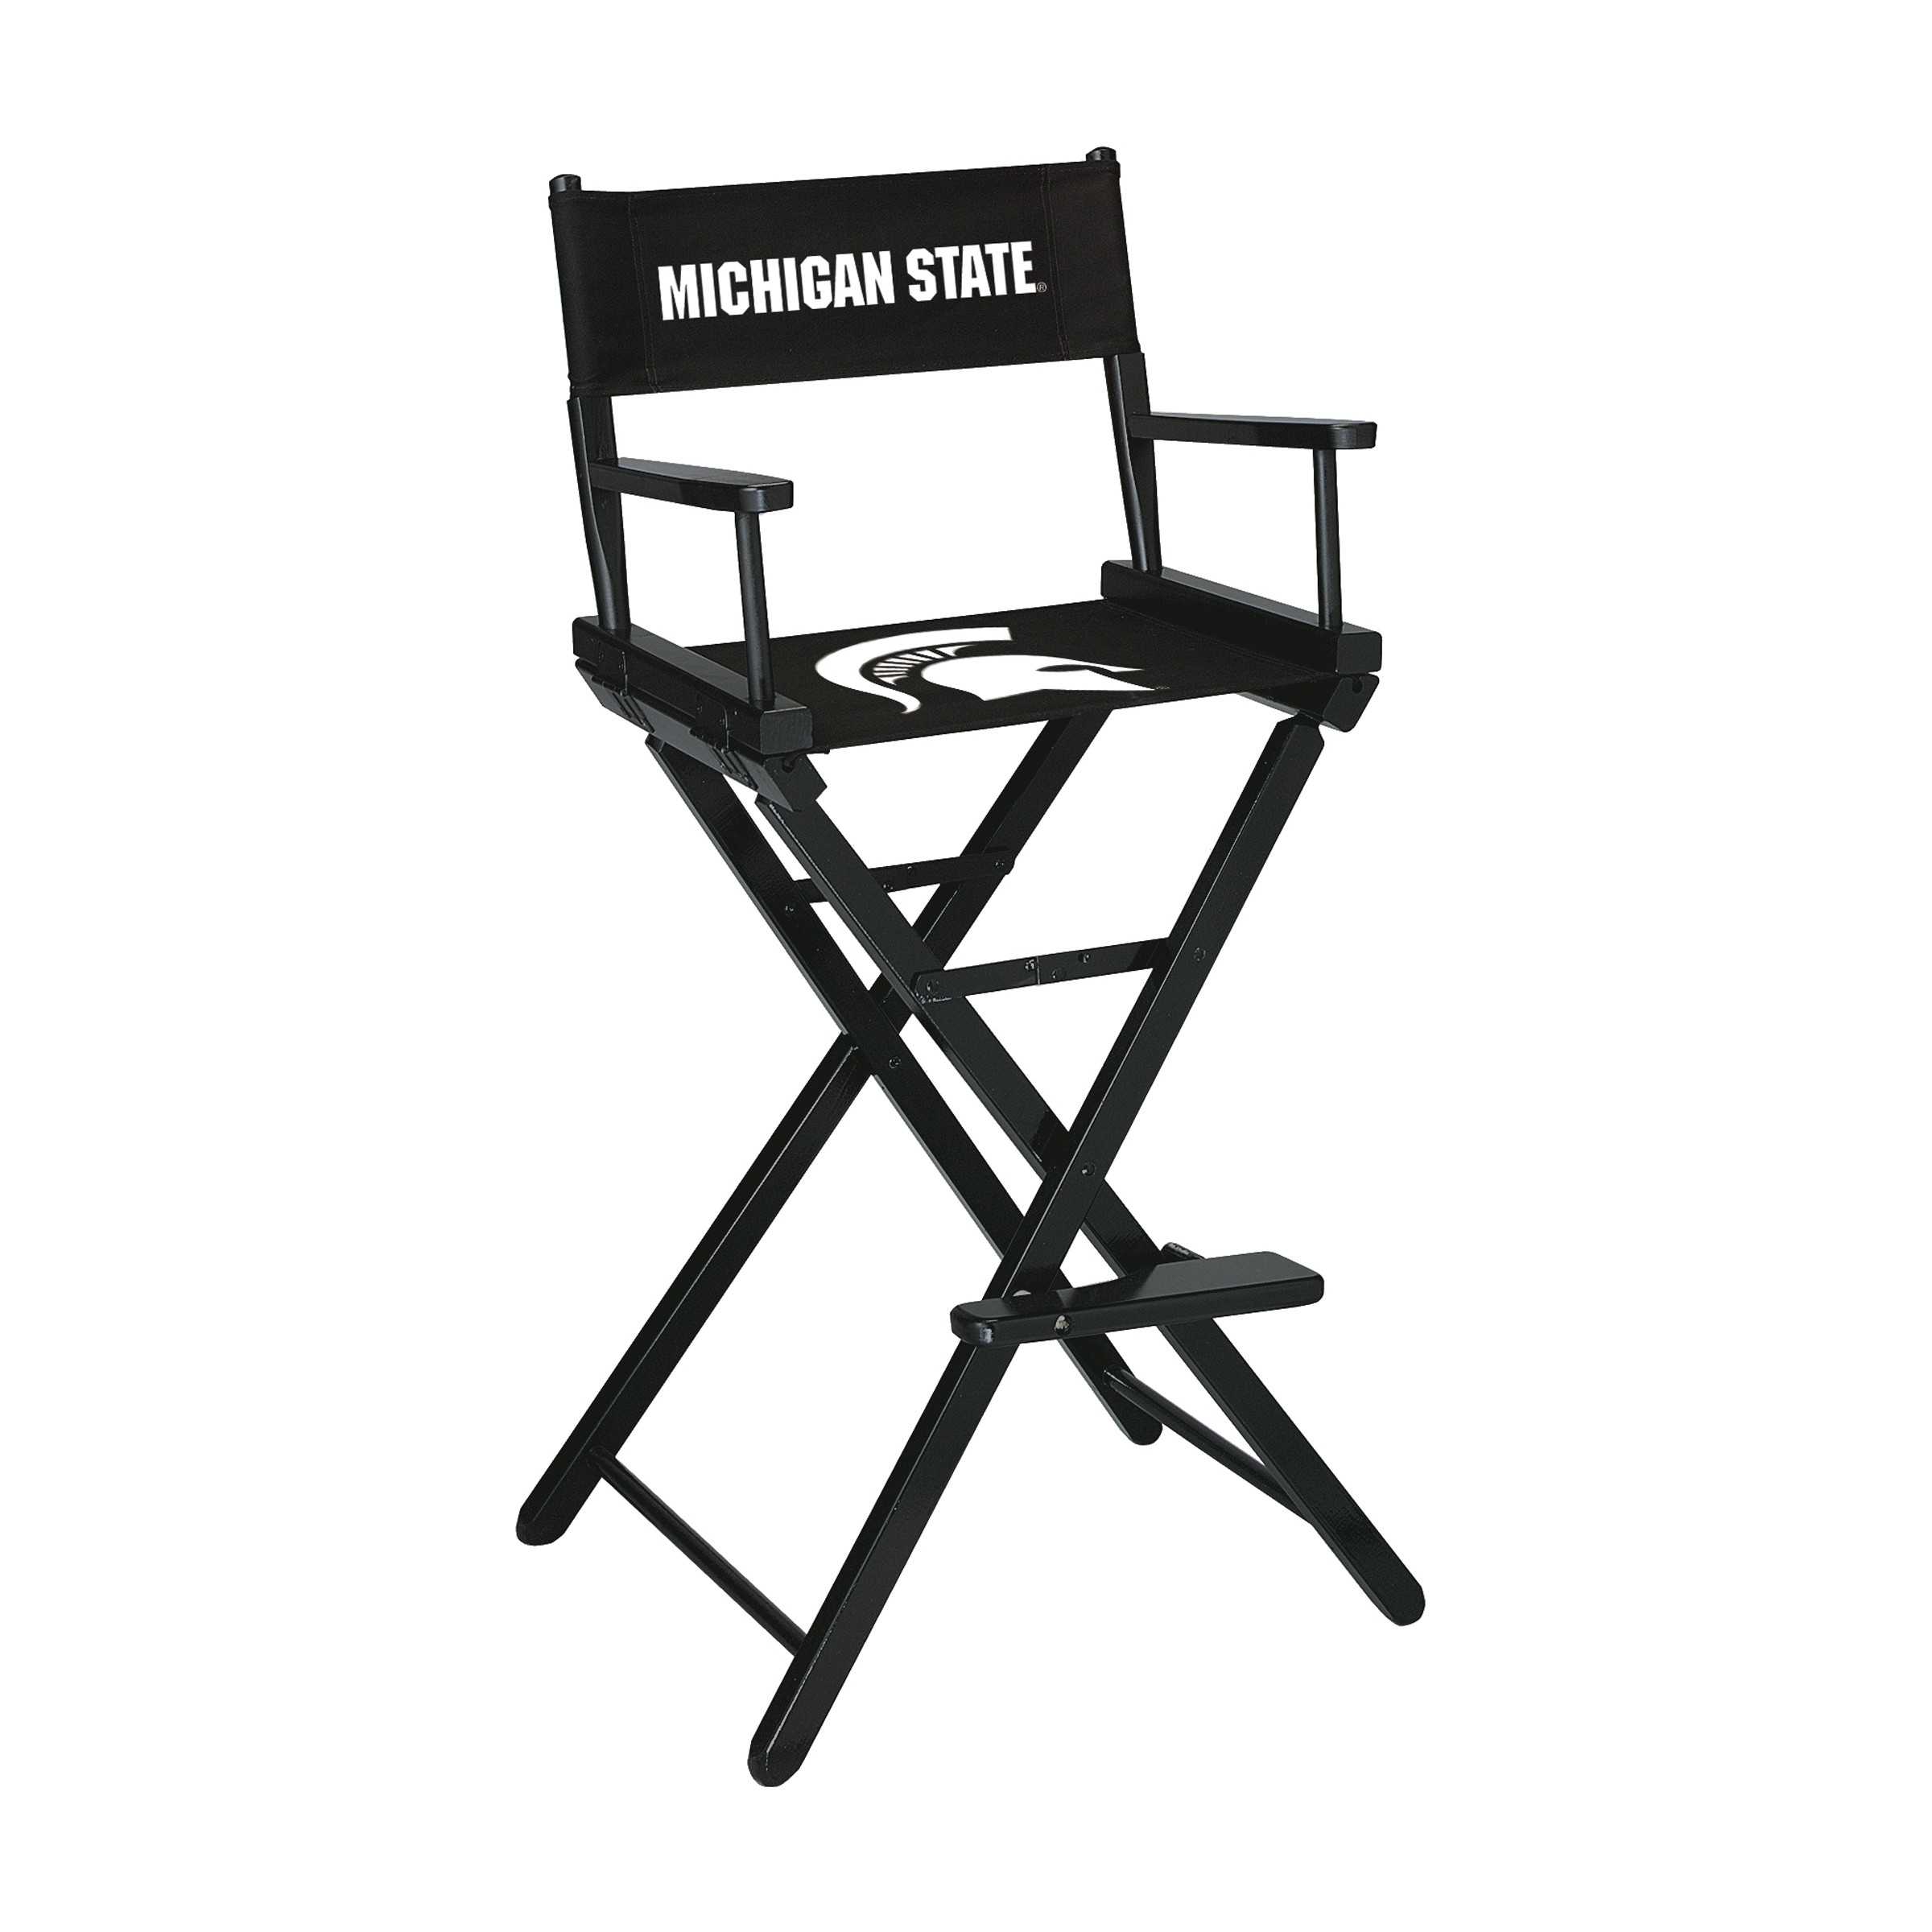 MICHIGAN STATE DIRECTORS CHAIR-BAR HEIGHT